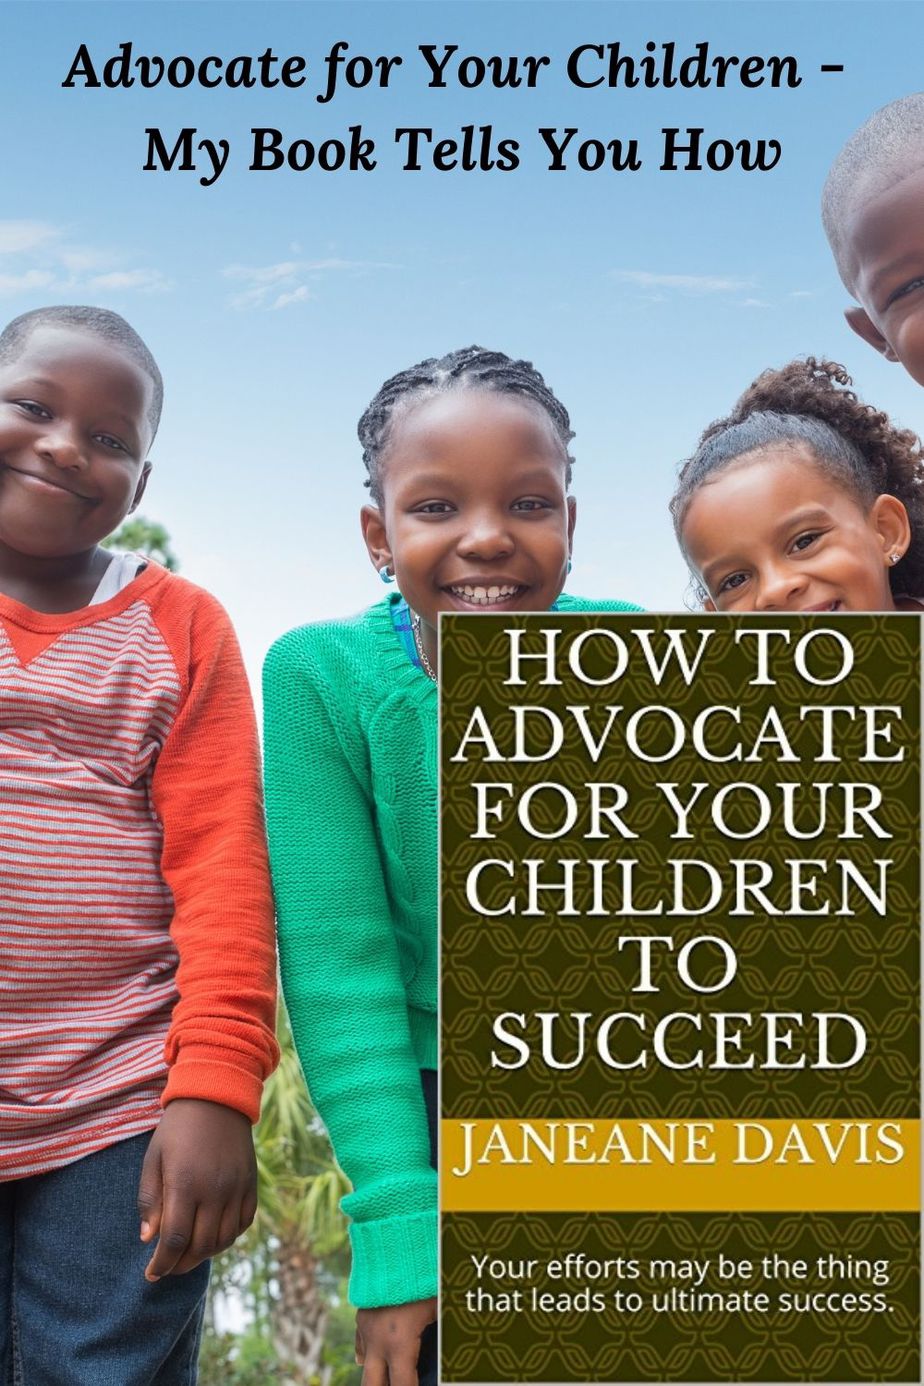 Advocate for Your Children - My Book Tells You How